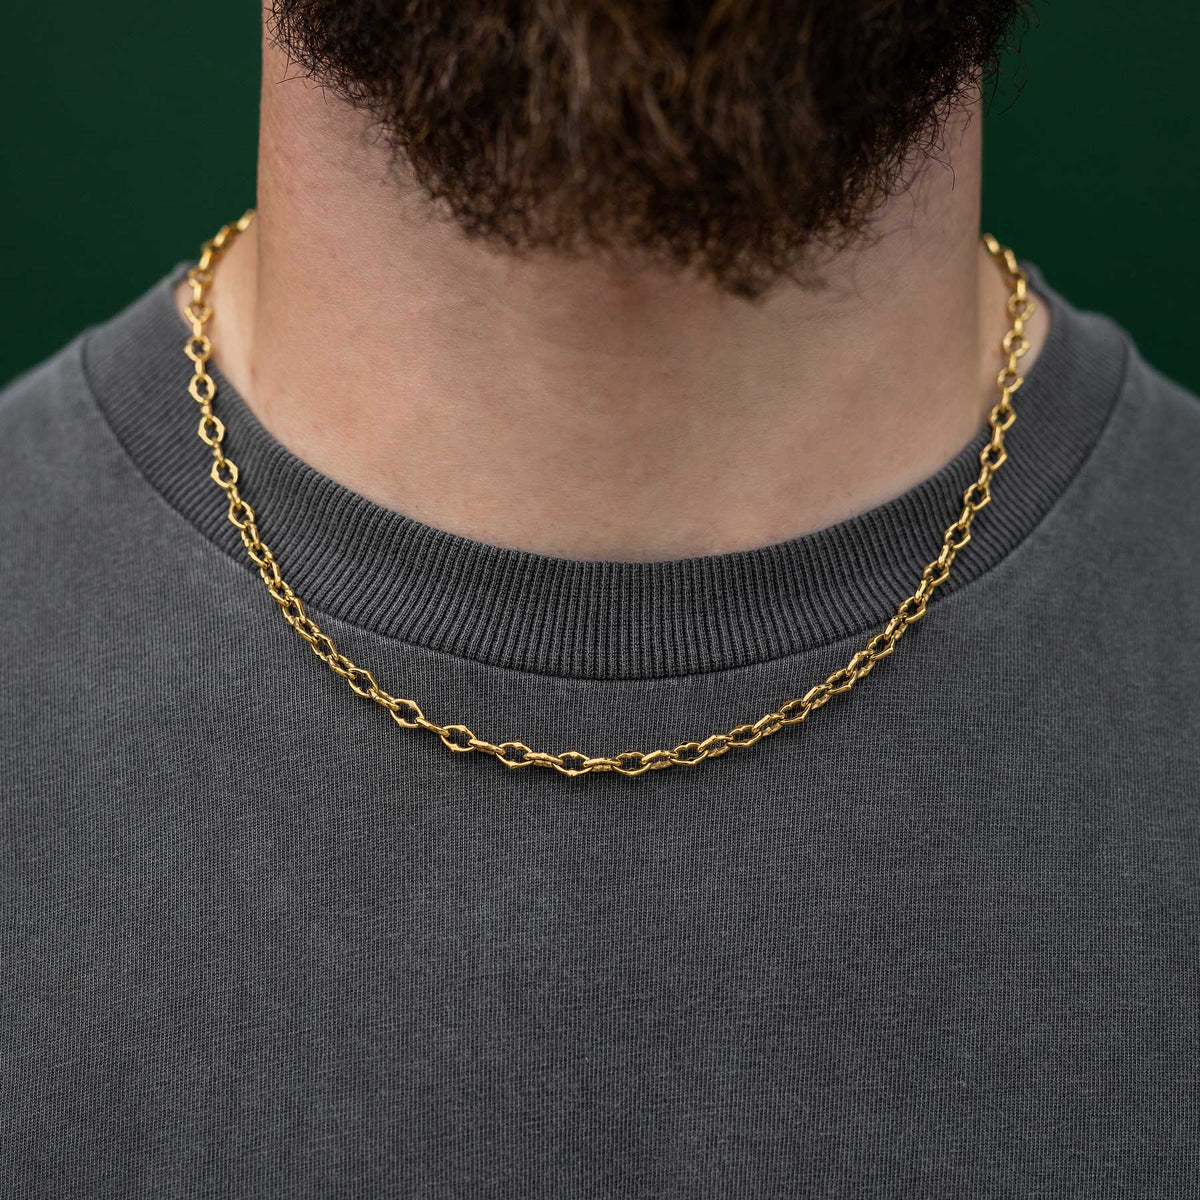 Spikey chain necklace on male neck by statement